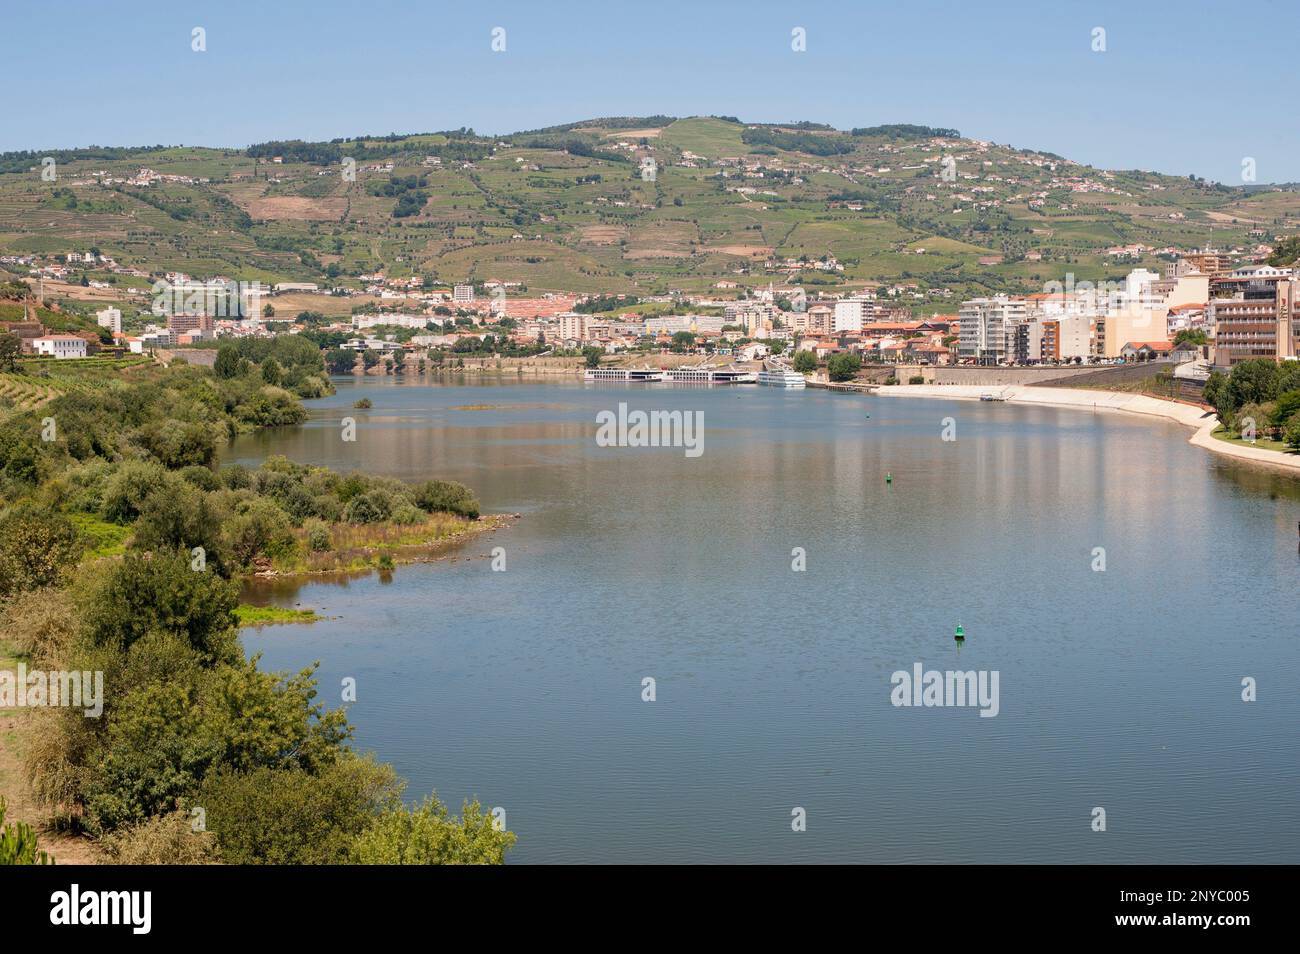 Peso da Regua or Regua is a town located on the banks of Douro river. Vila Real, Portugal. Stock Photo